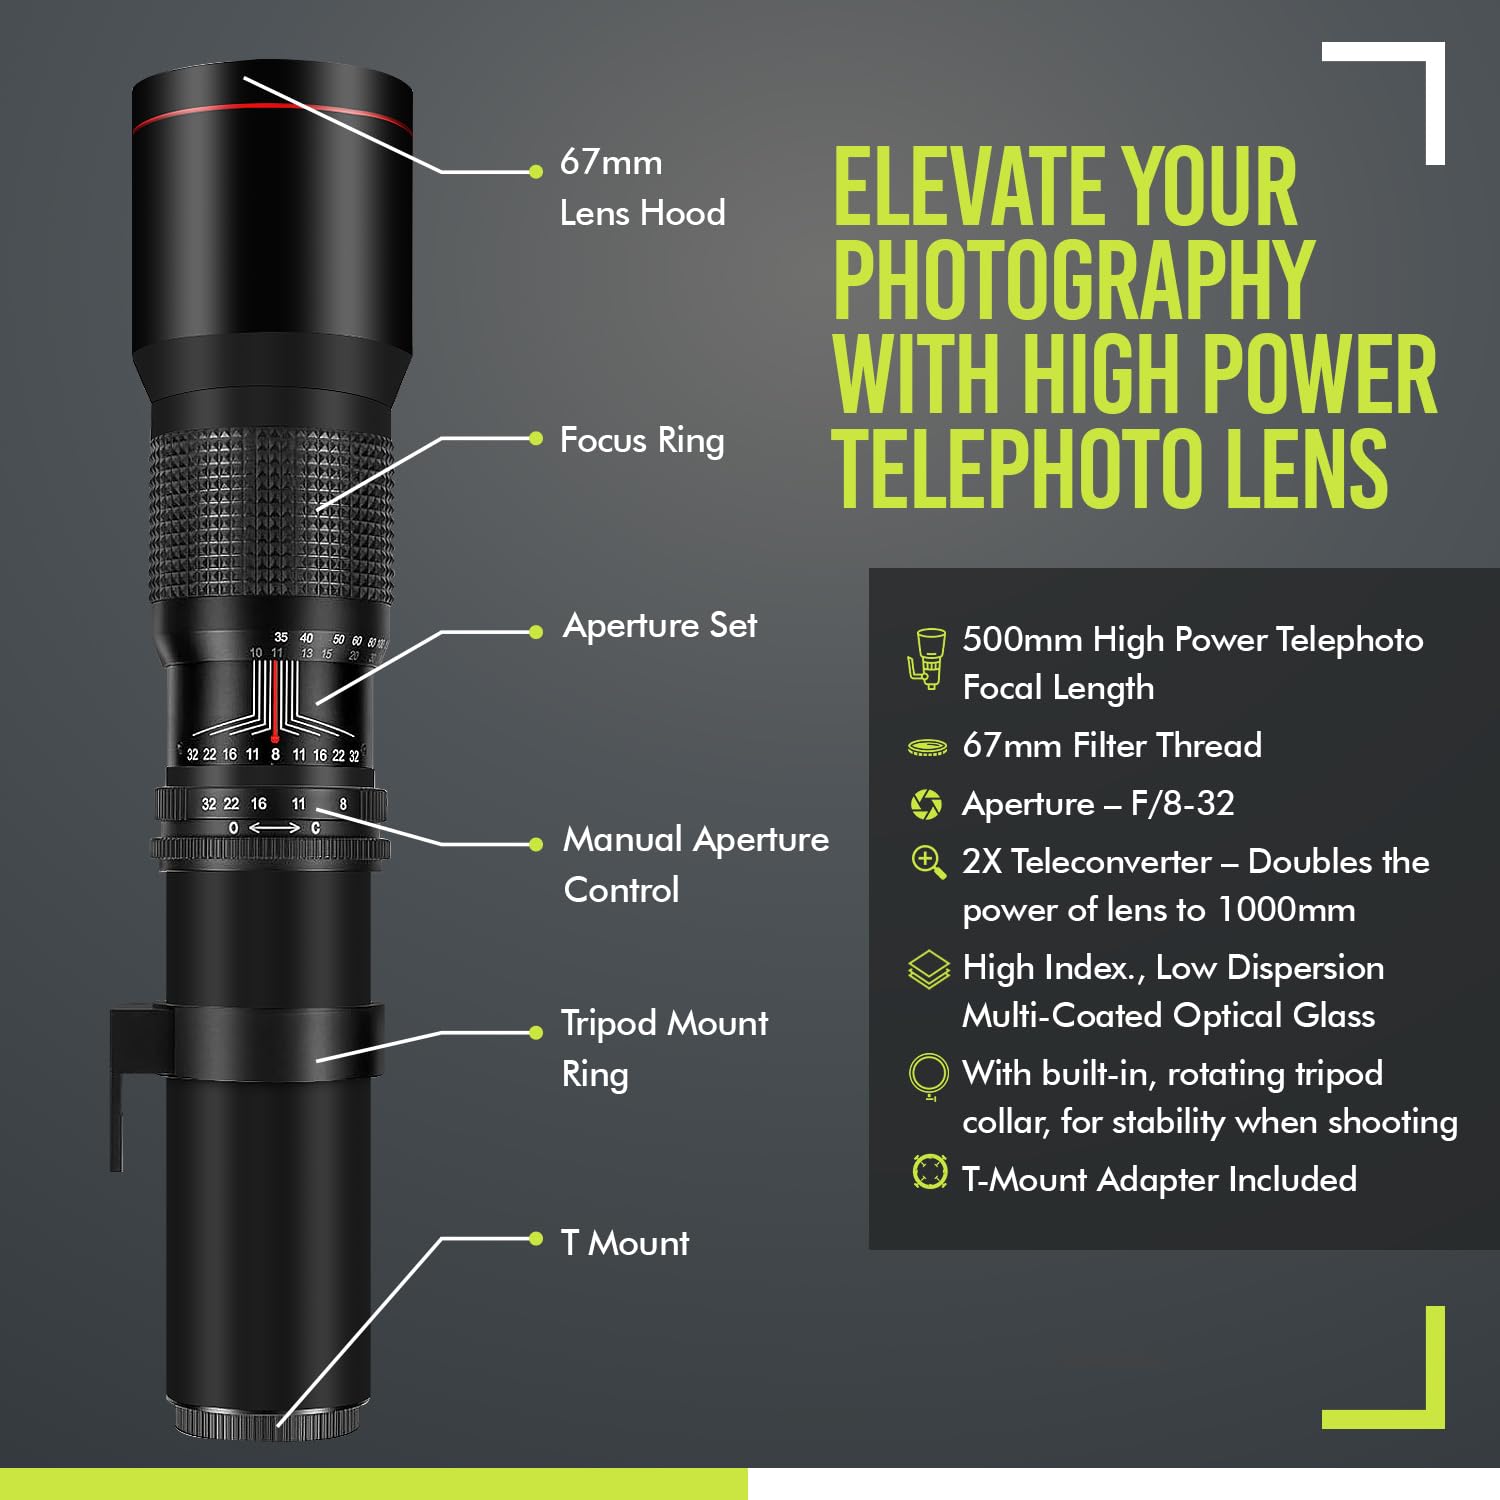 High-Power 500mm/1000mm f/8 Manual Telephoto Lens for Canon Digital EOS Rebel T1i T2i T3 T3i T4i T5 T5i T6i T6s SL1 EOS60D EOS70D 50D 40D 30D EOS 5D EOS1D EOS5D III EOS 5Ds EOS 6D EOS 7D EOS 7D Mark II Digital SLR Cameras - BLACK